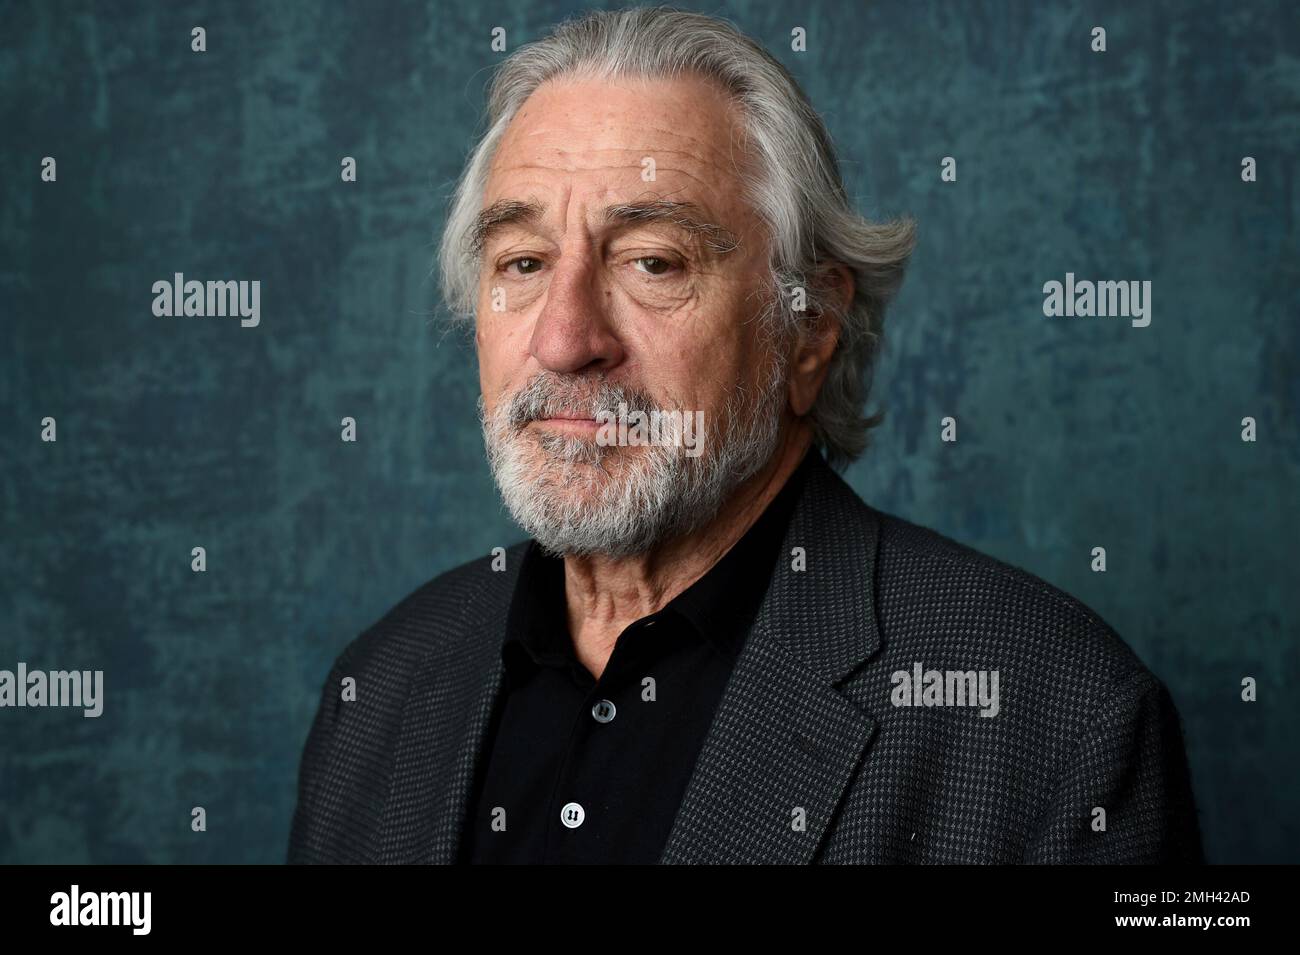 Robert De Niro Poses For A Portrait At The 92nd Academy Awards Nominees Luncheon At The Loews 